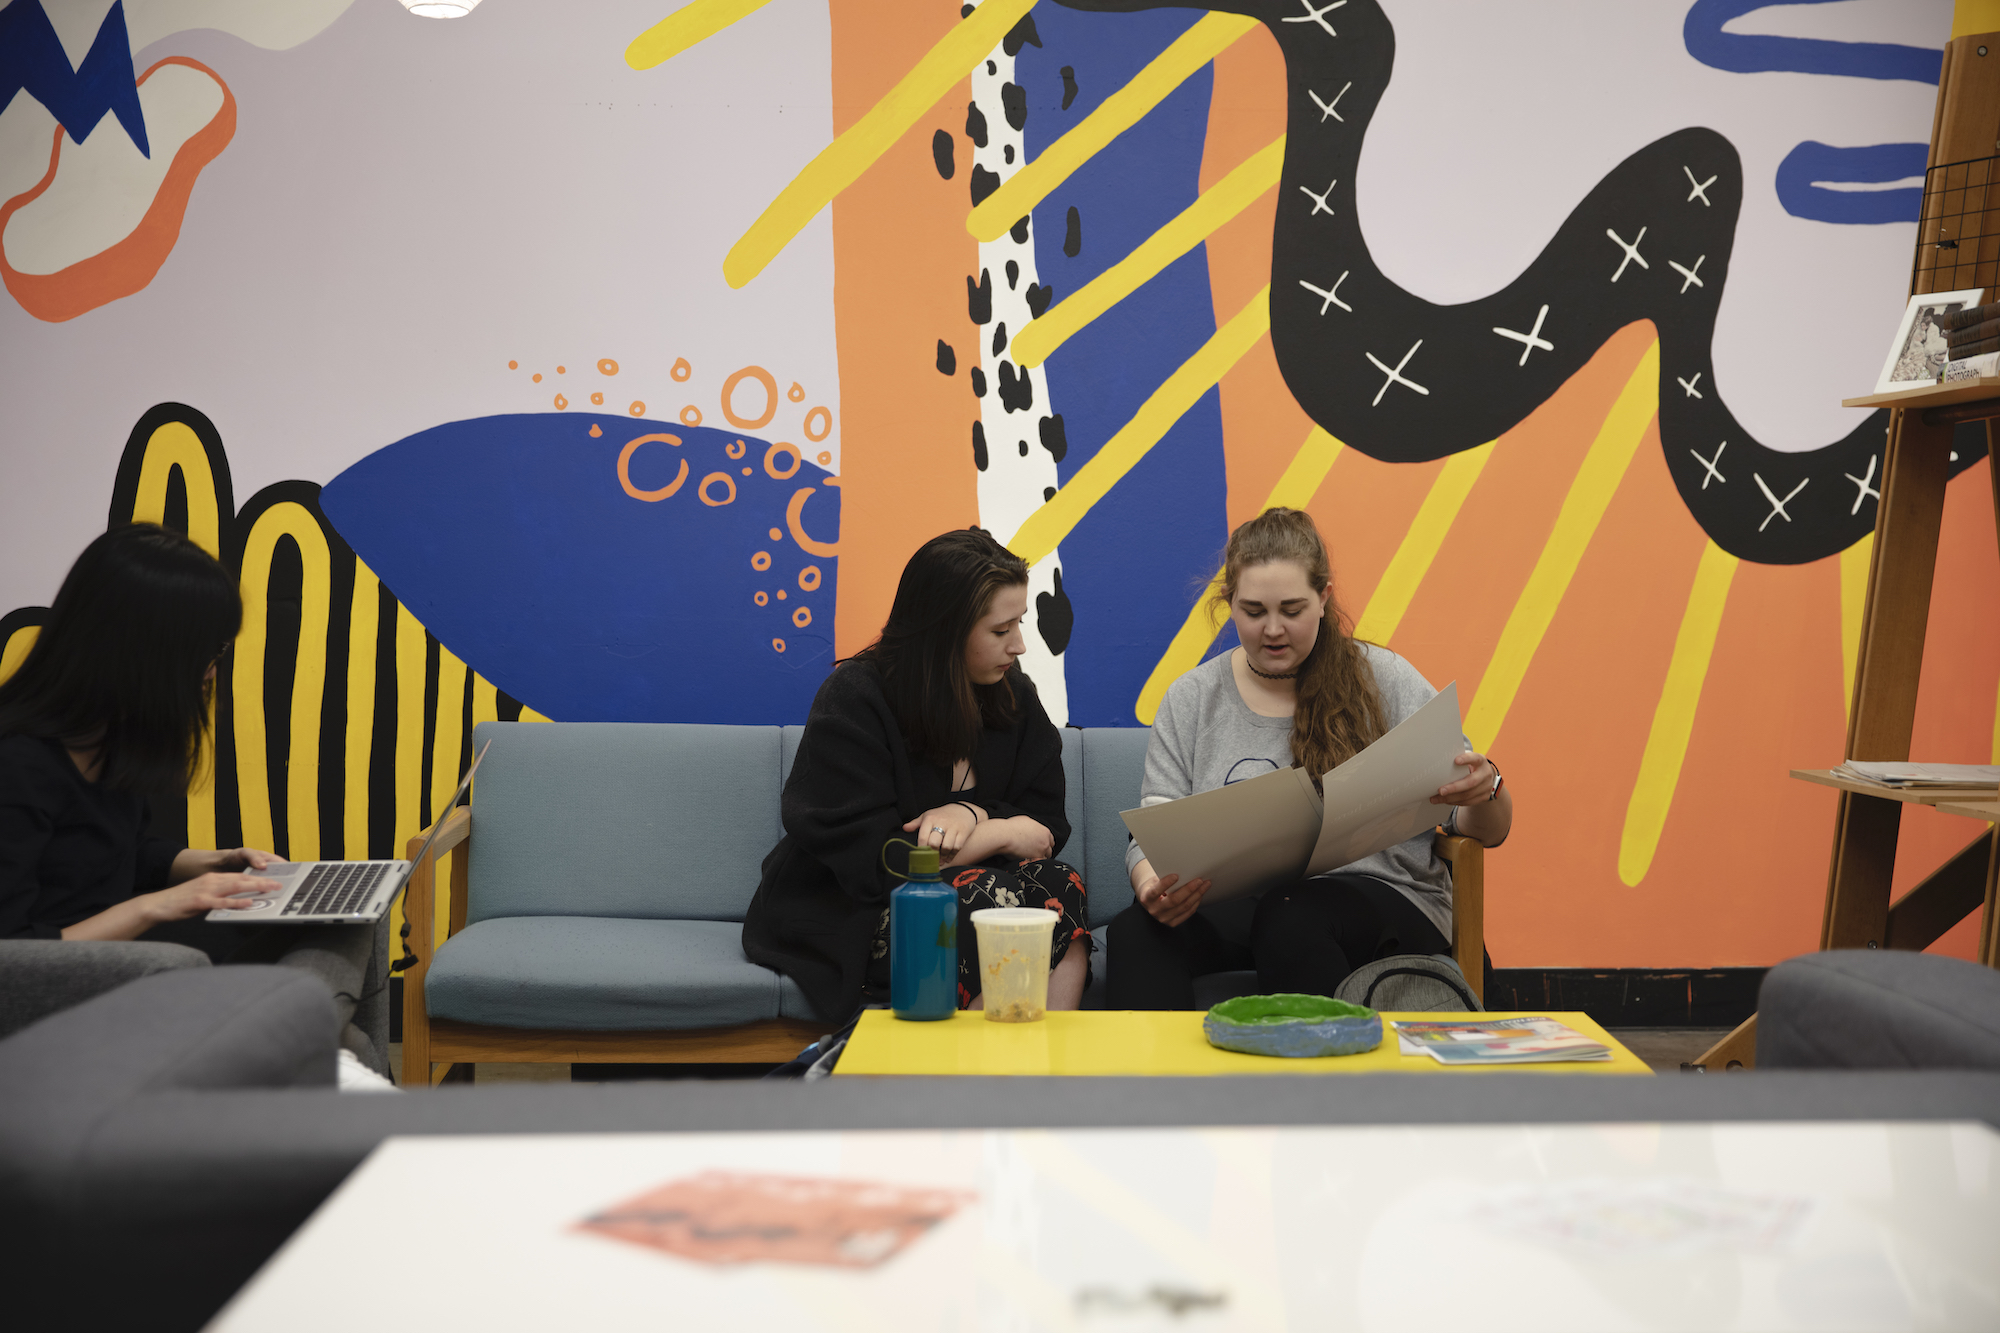 Two women studying on a sofa in front of a colorful mural.